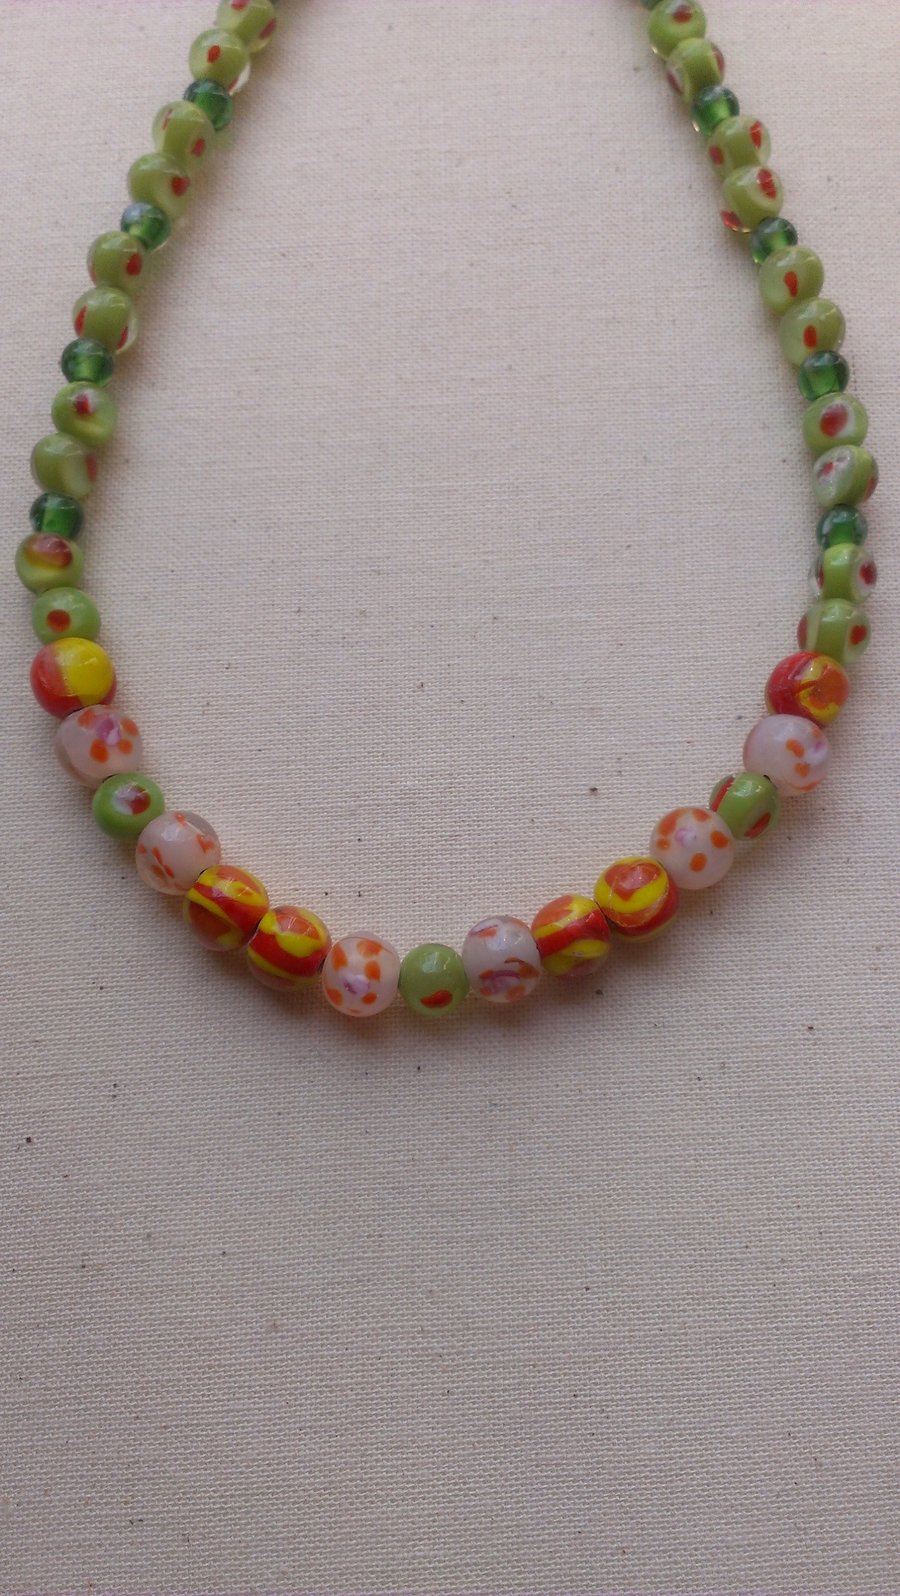 SALE Lime Green Glass Bead Necklace